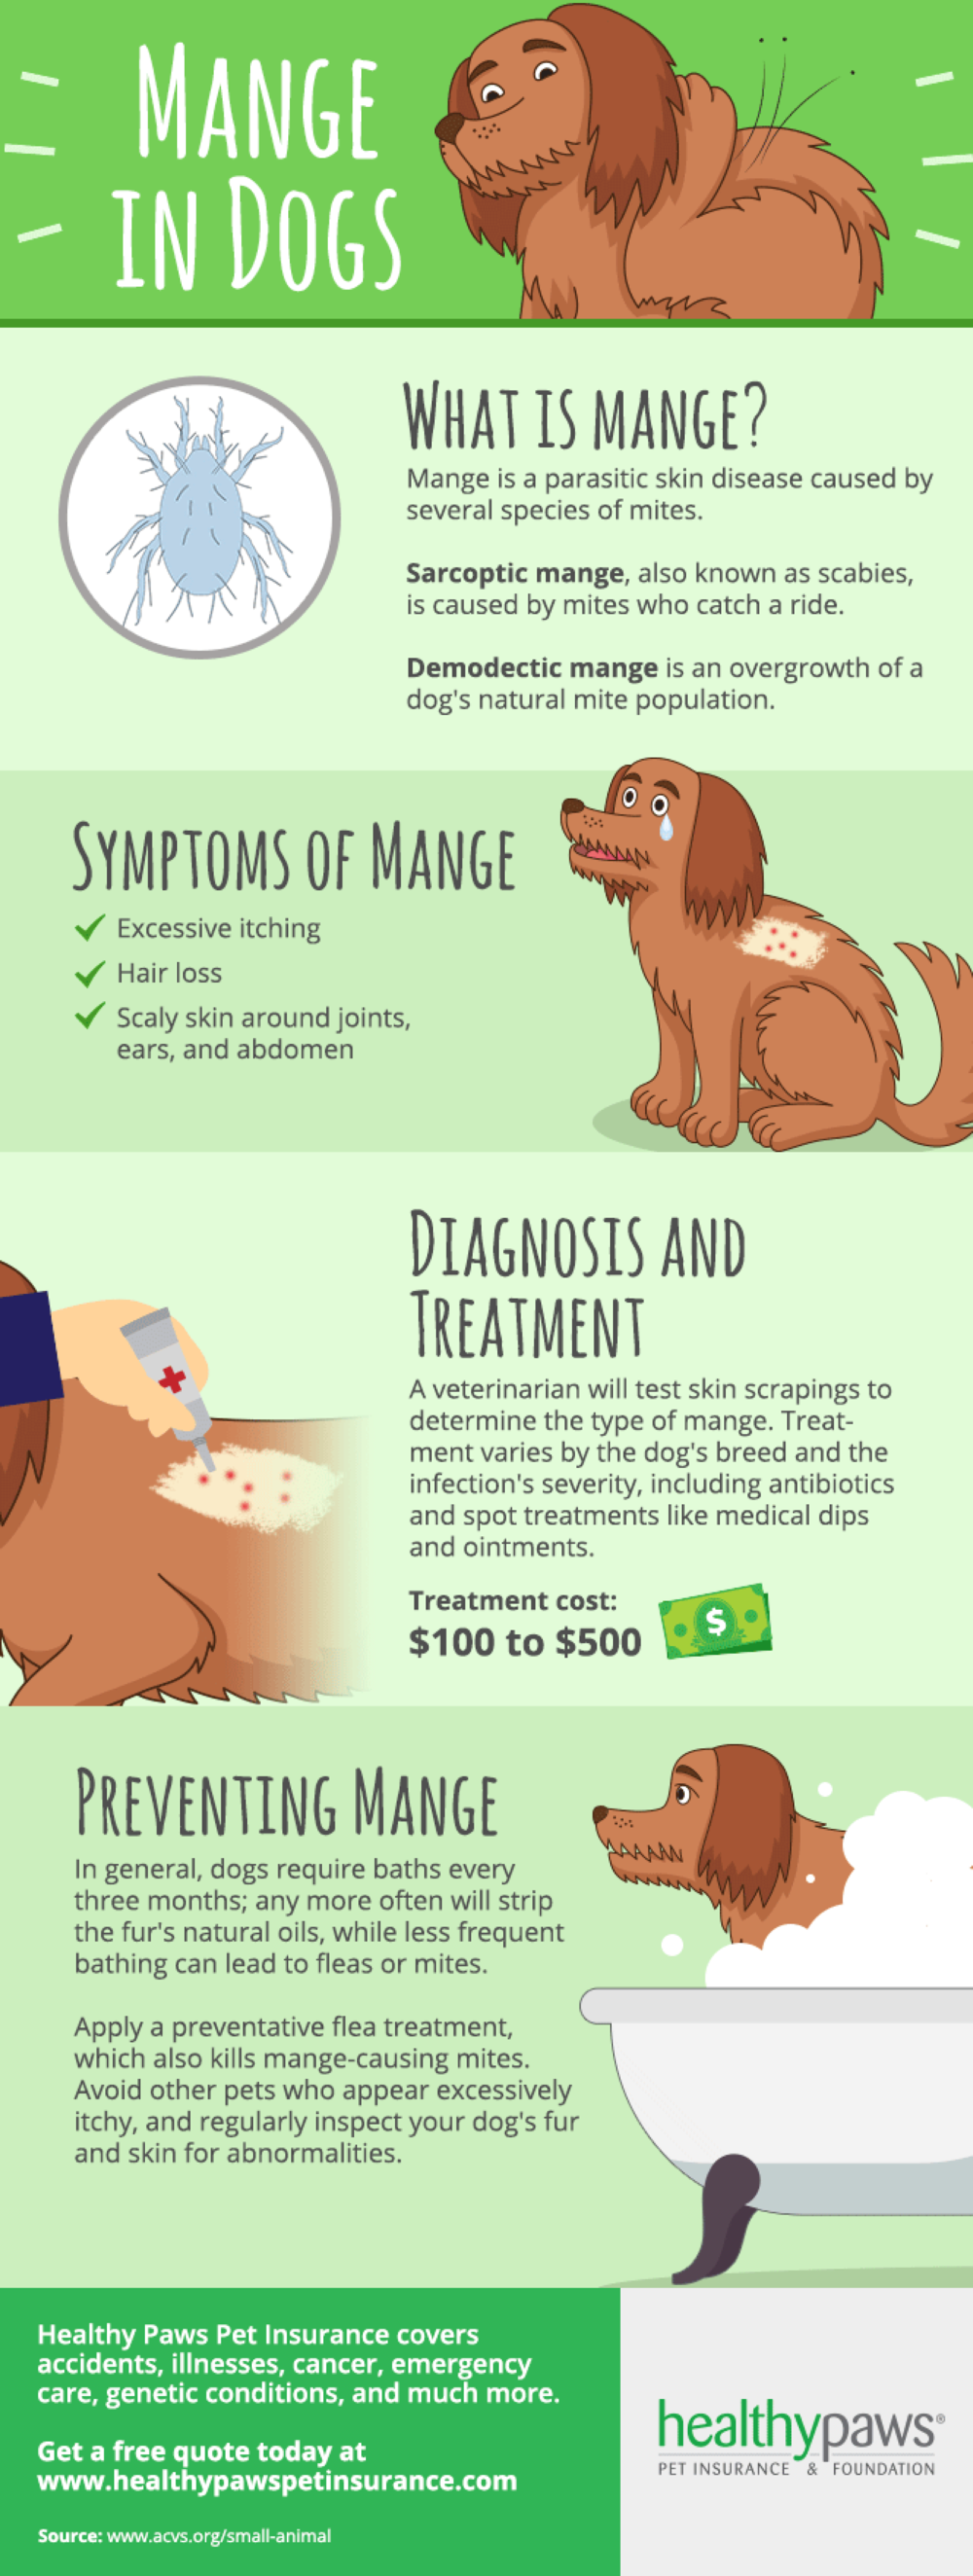 mange in dogs infographic